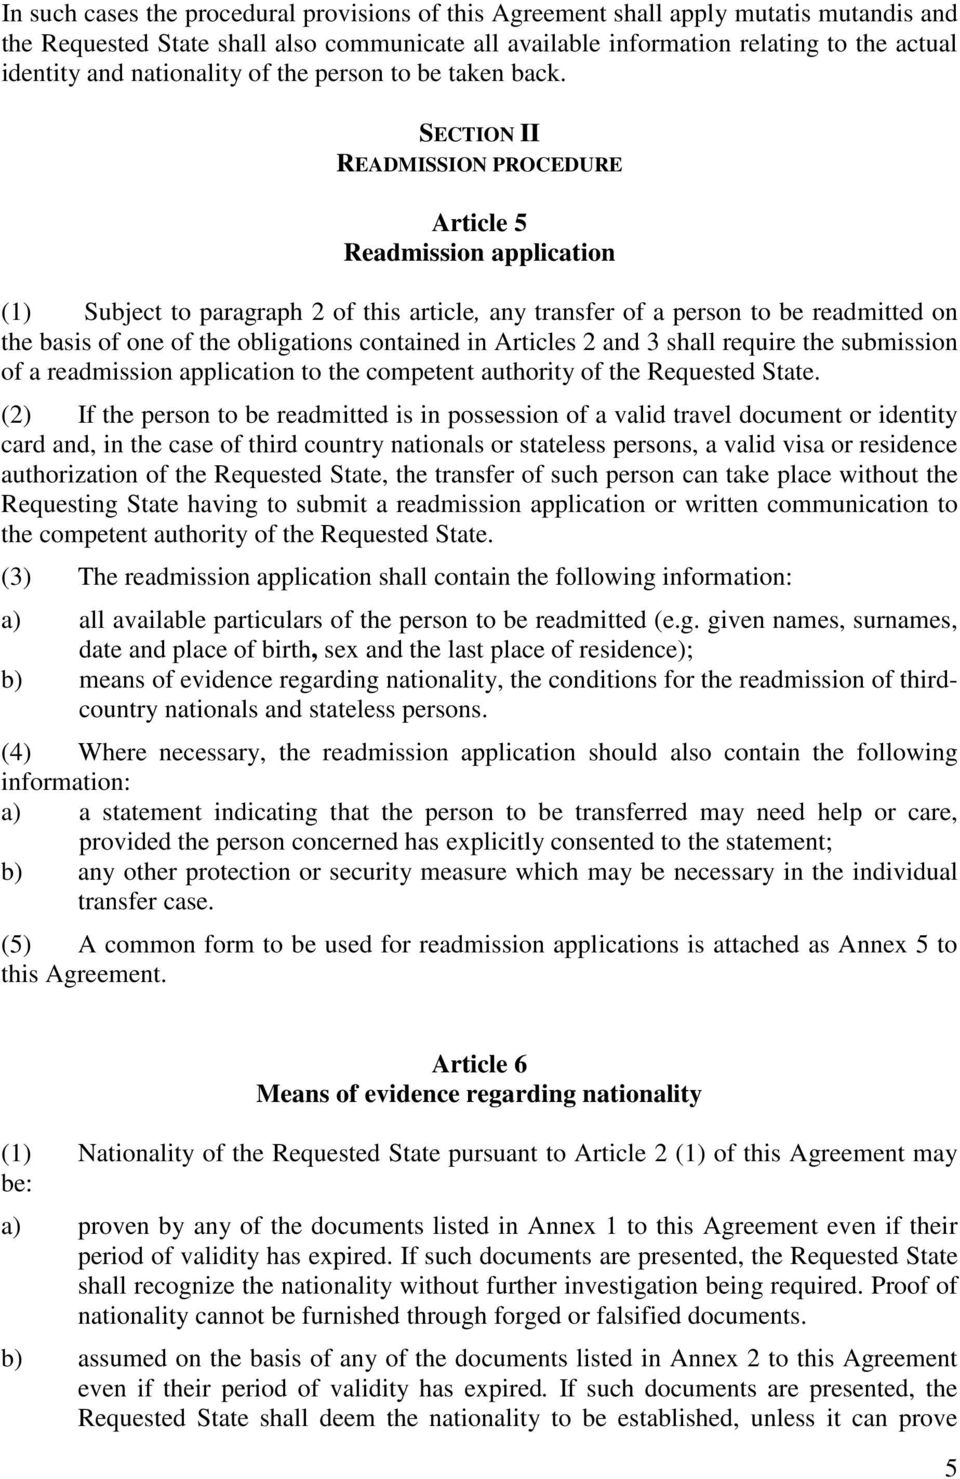 SECTION II READMISSION PROCEDURE Article 5 Readmission application (1) Subject to paragraph 2 of this article, any transfer of a person to be readmitted on the basis of one of the obligations